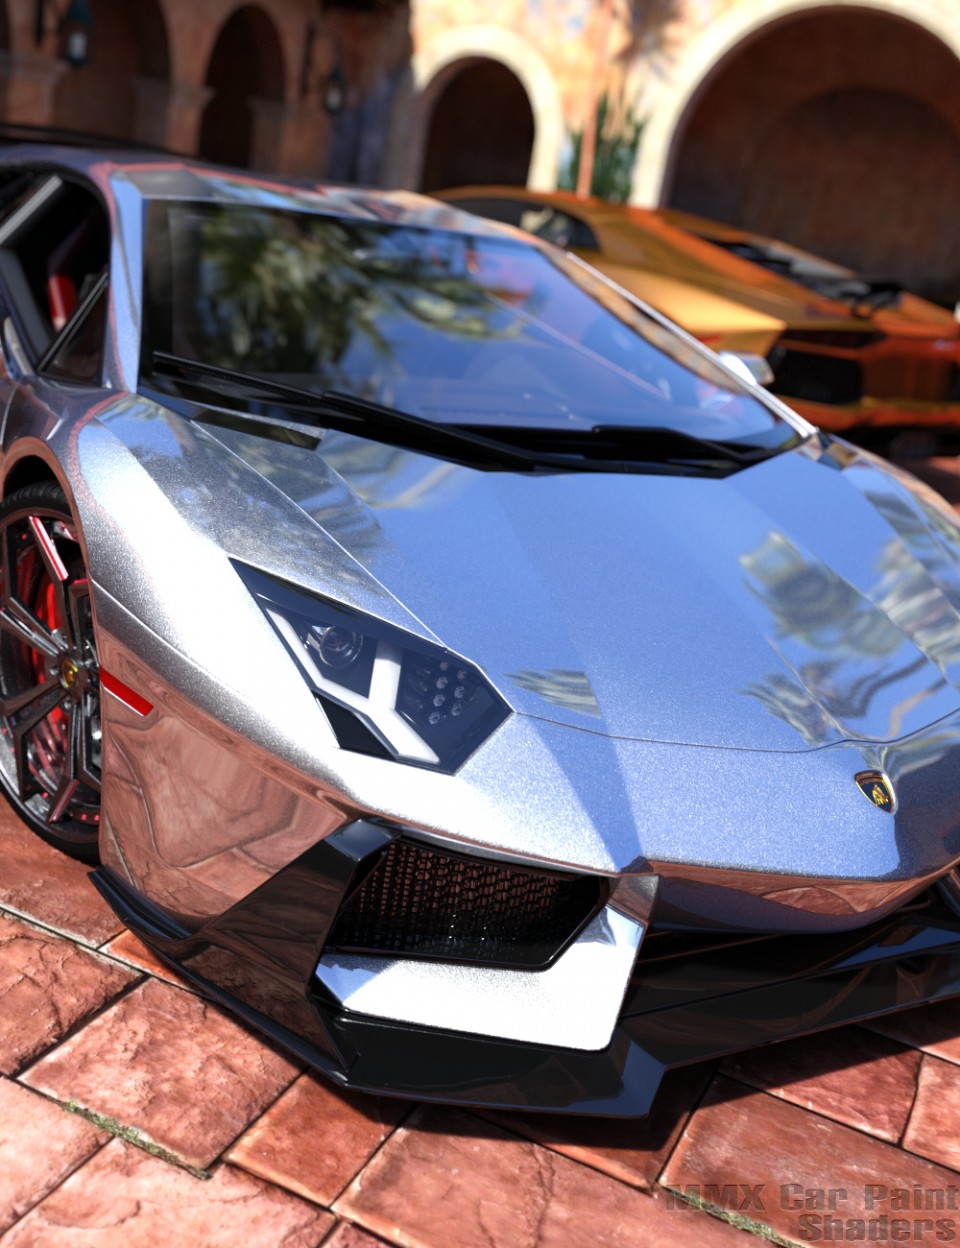 MMX Car Paint Shaders for Iray_DAZ3D下载站